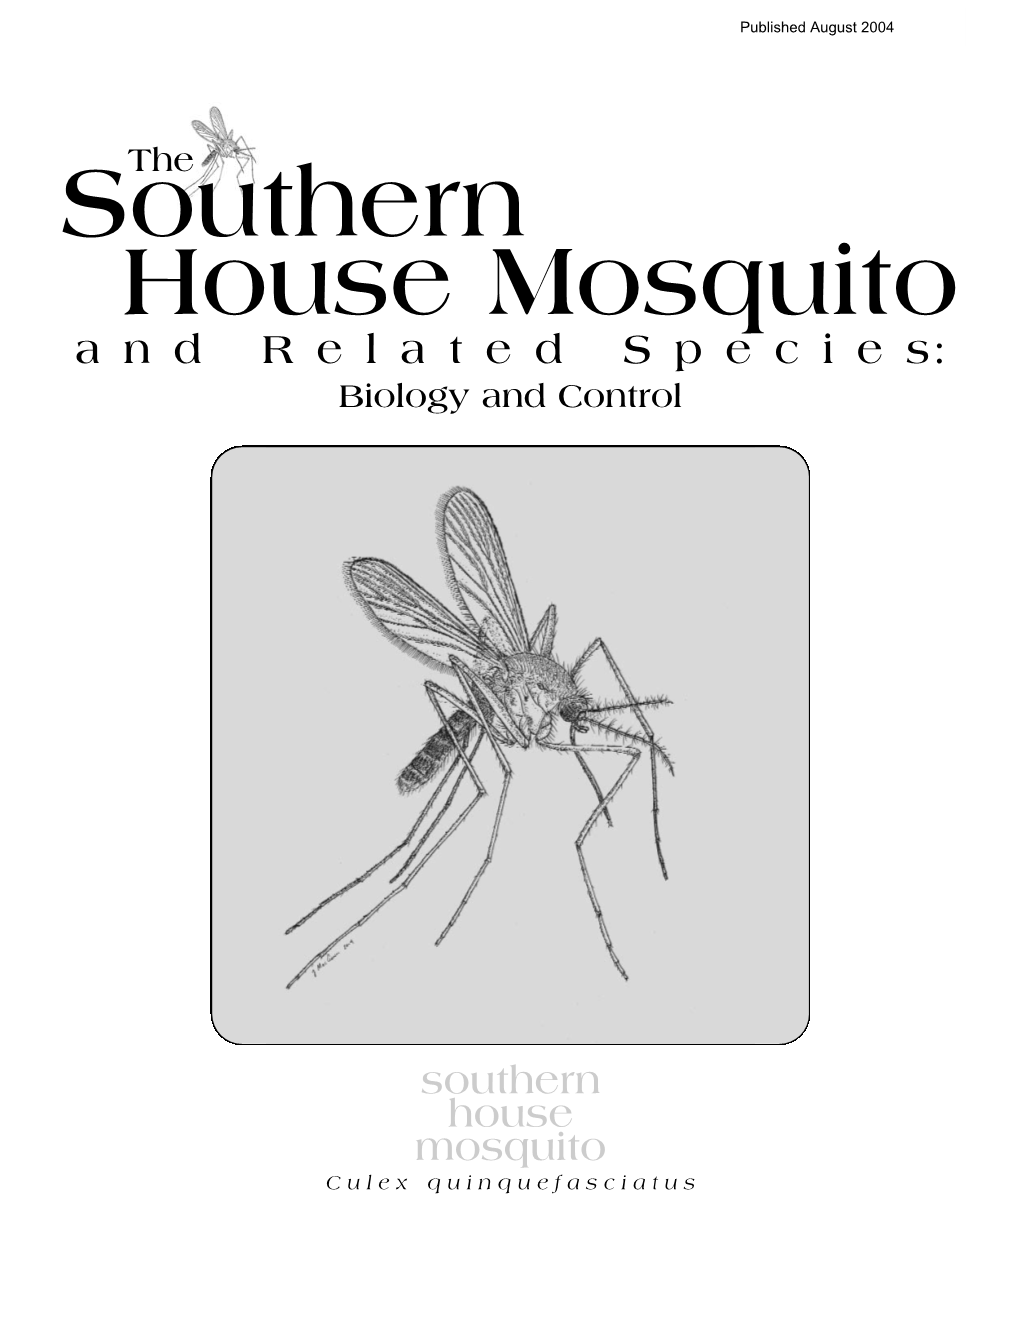 P2336 the Southern House Mosquito and Related Species: Biology And